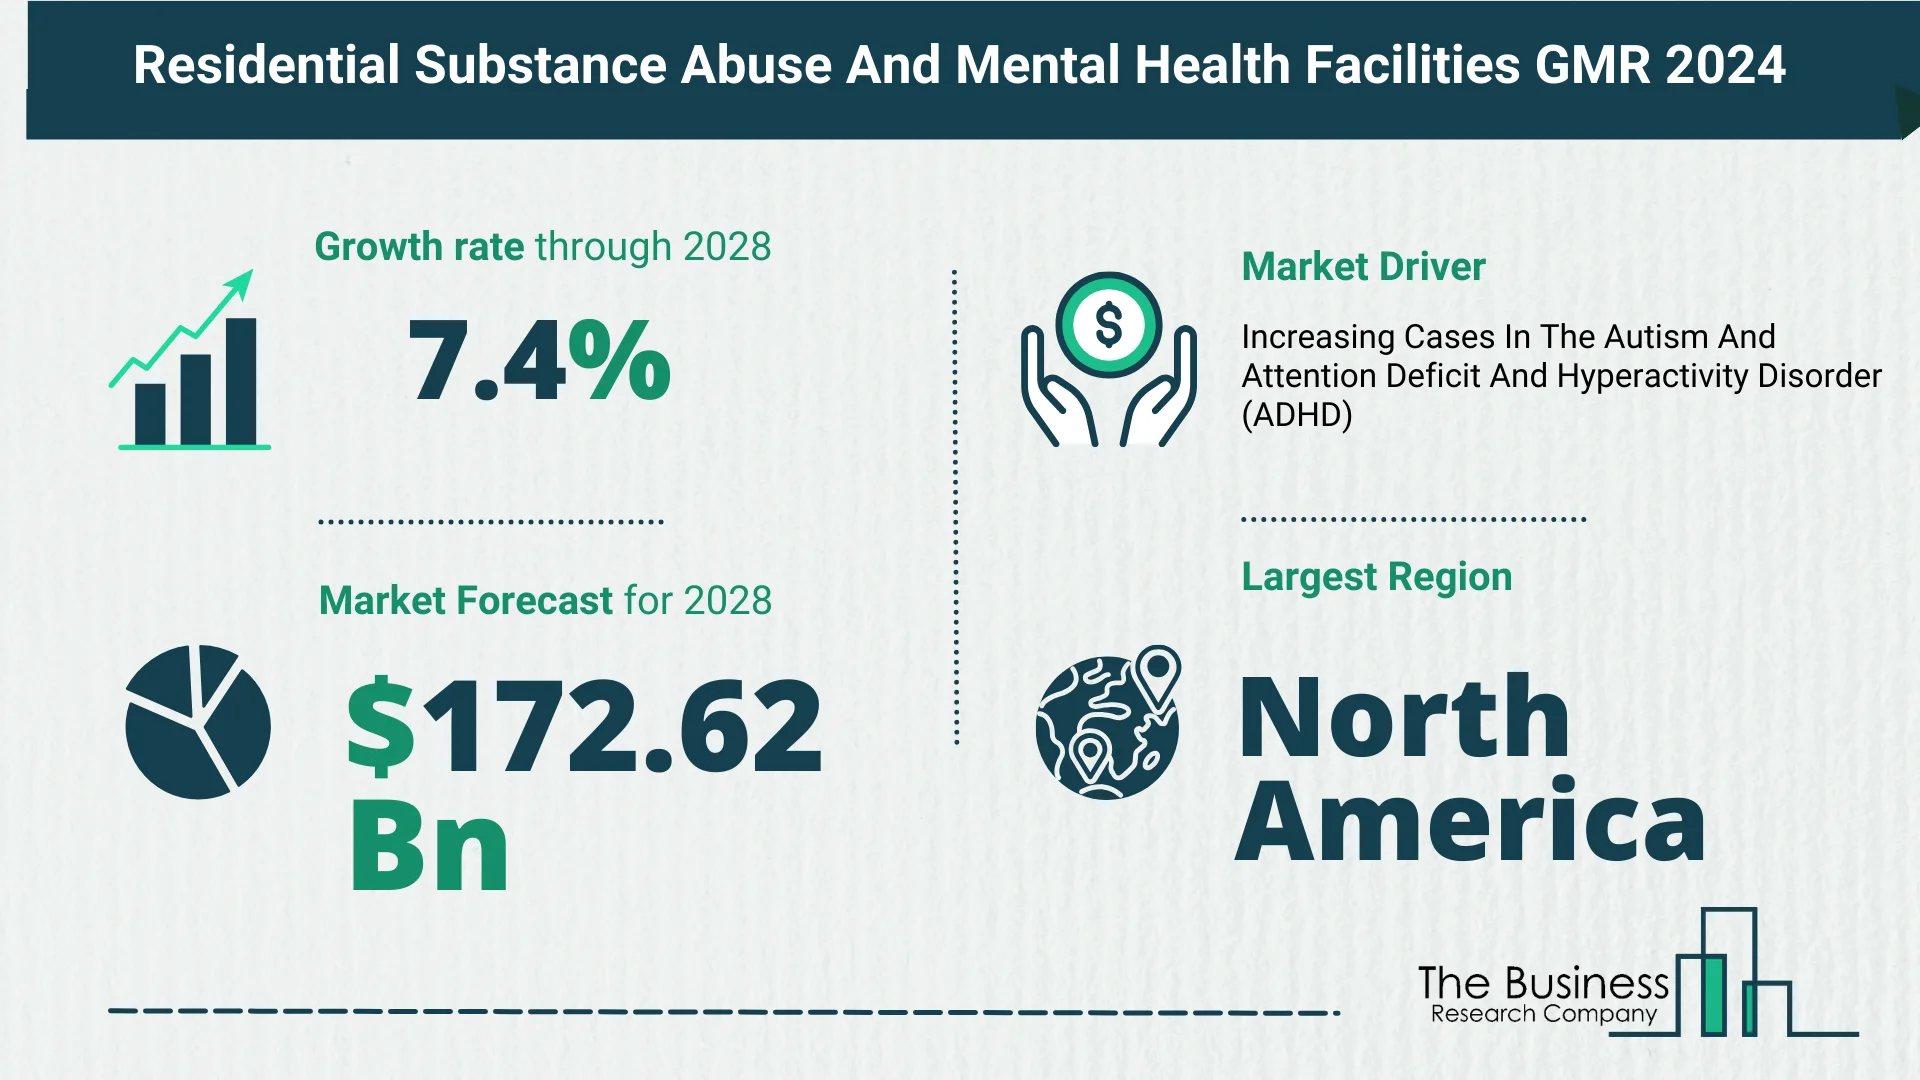 Residential Substance Abuse And Mental Health Facilities Market Growth Analysis Till 2033 By The Business Research Company